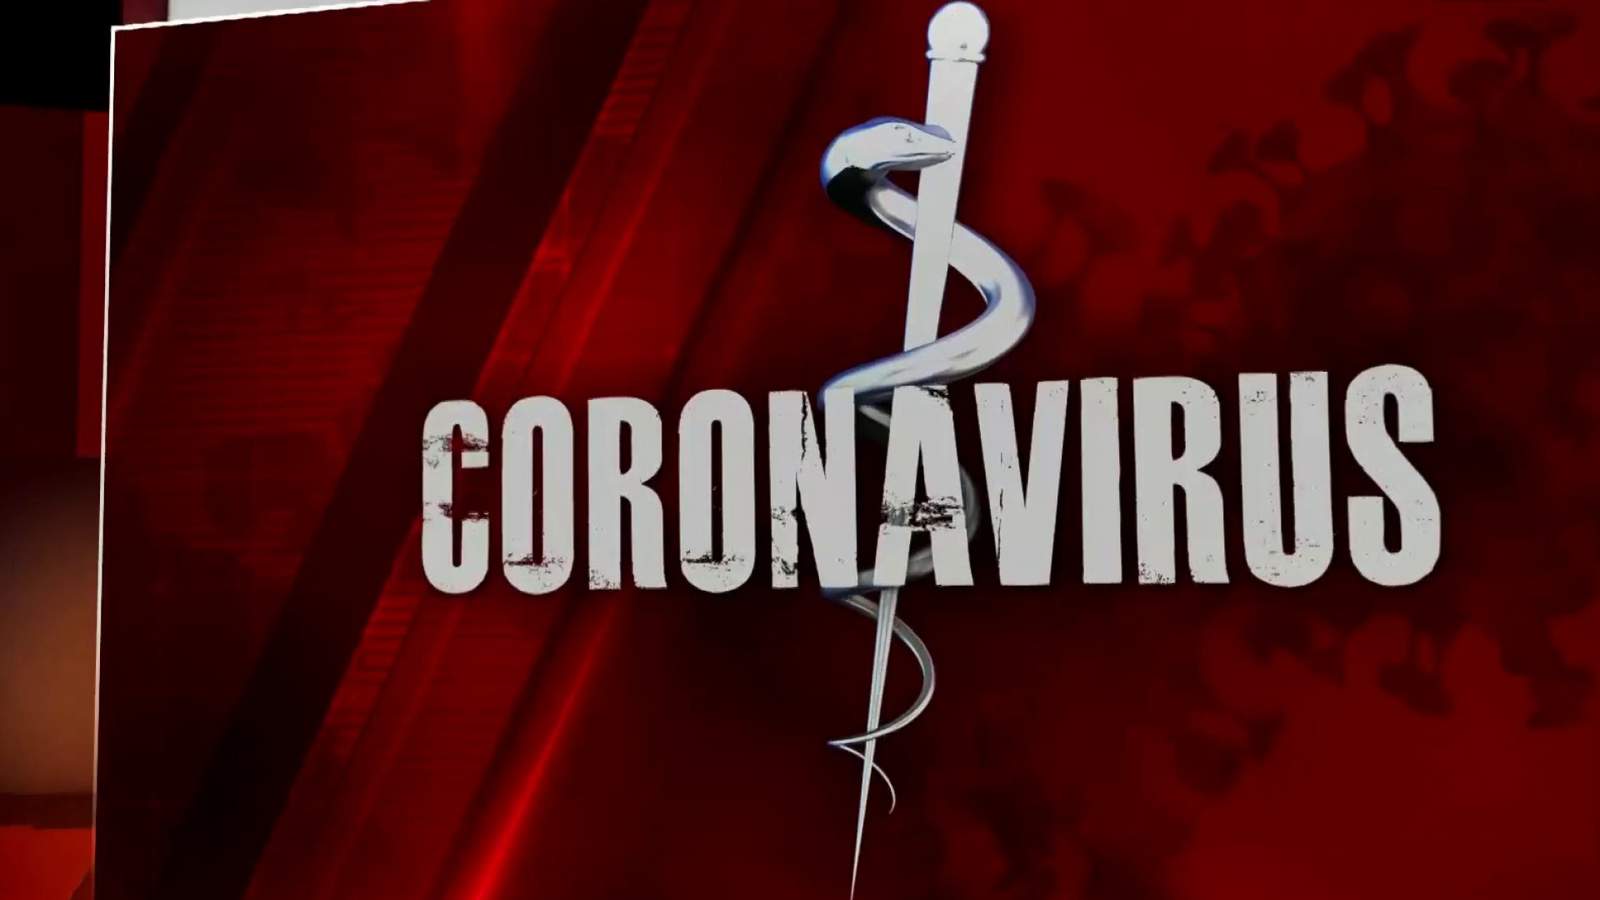 Department of Health announces 3 more positive cases of coronavirus, 1 in Volusia County